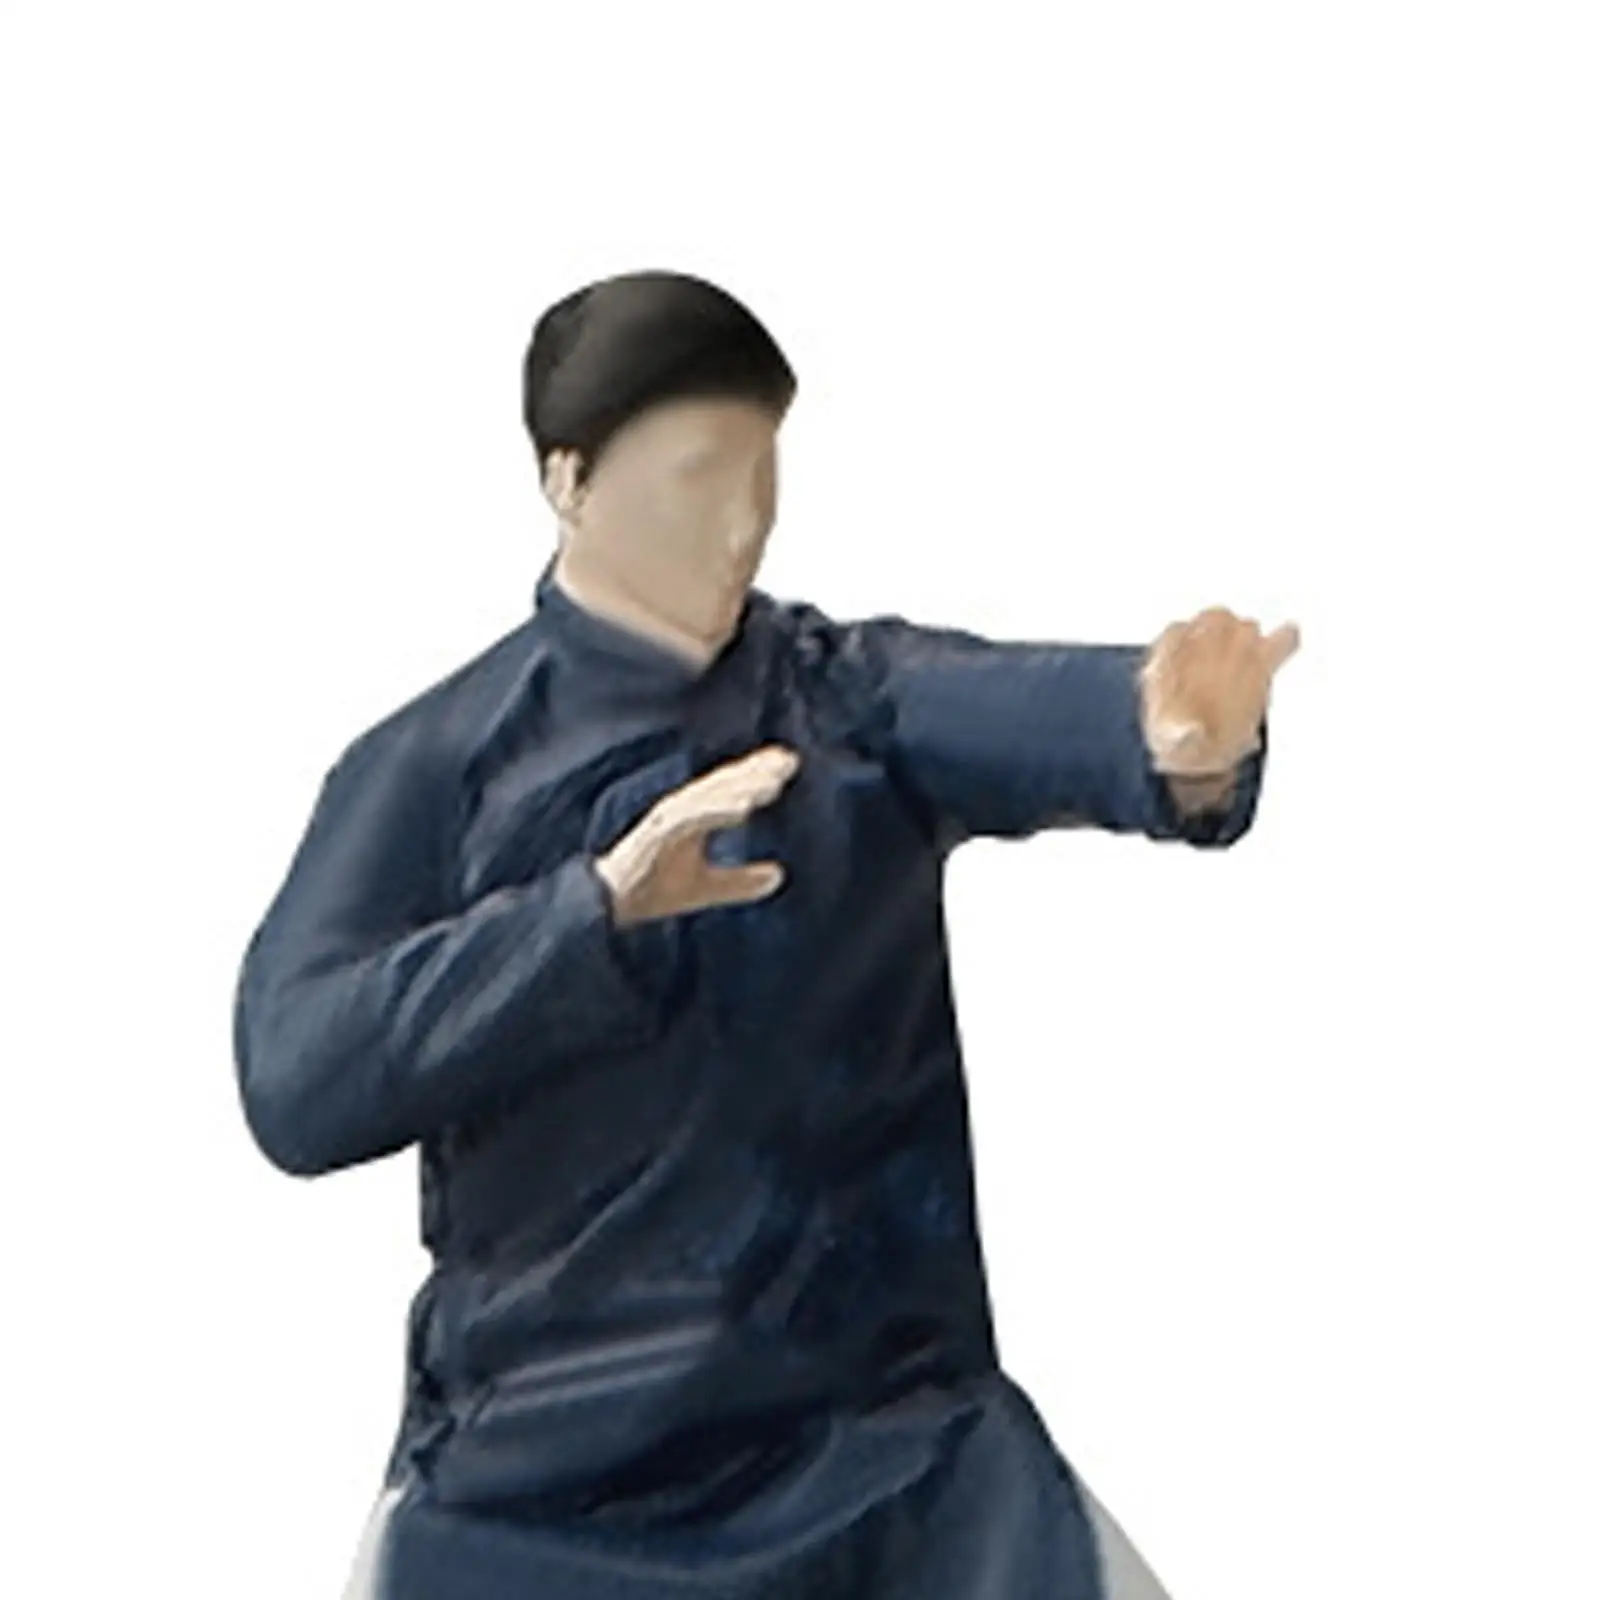 1/64 Scale Diorama Figure Painted Character Kungfu Figurine for Fariy Garden Collections Photo Props Model Trains Railway Sets